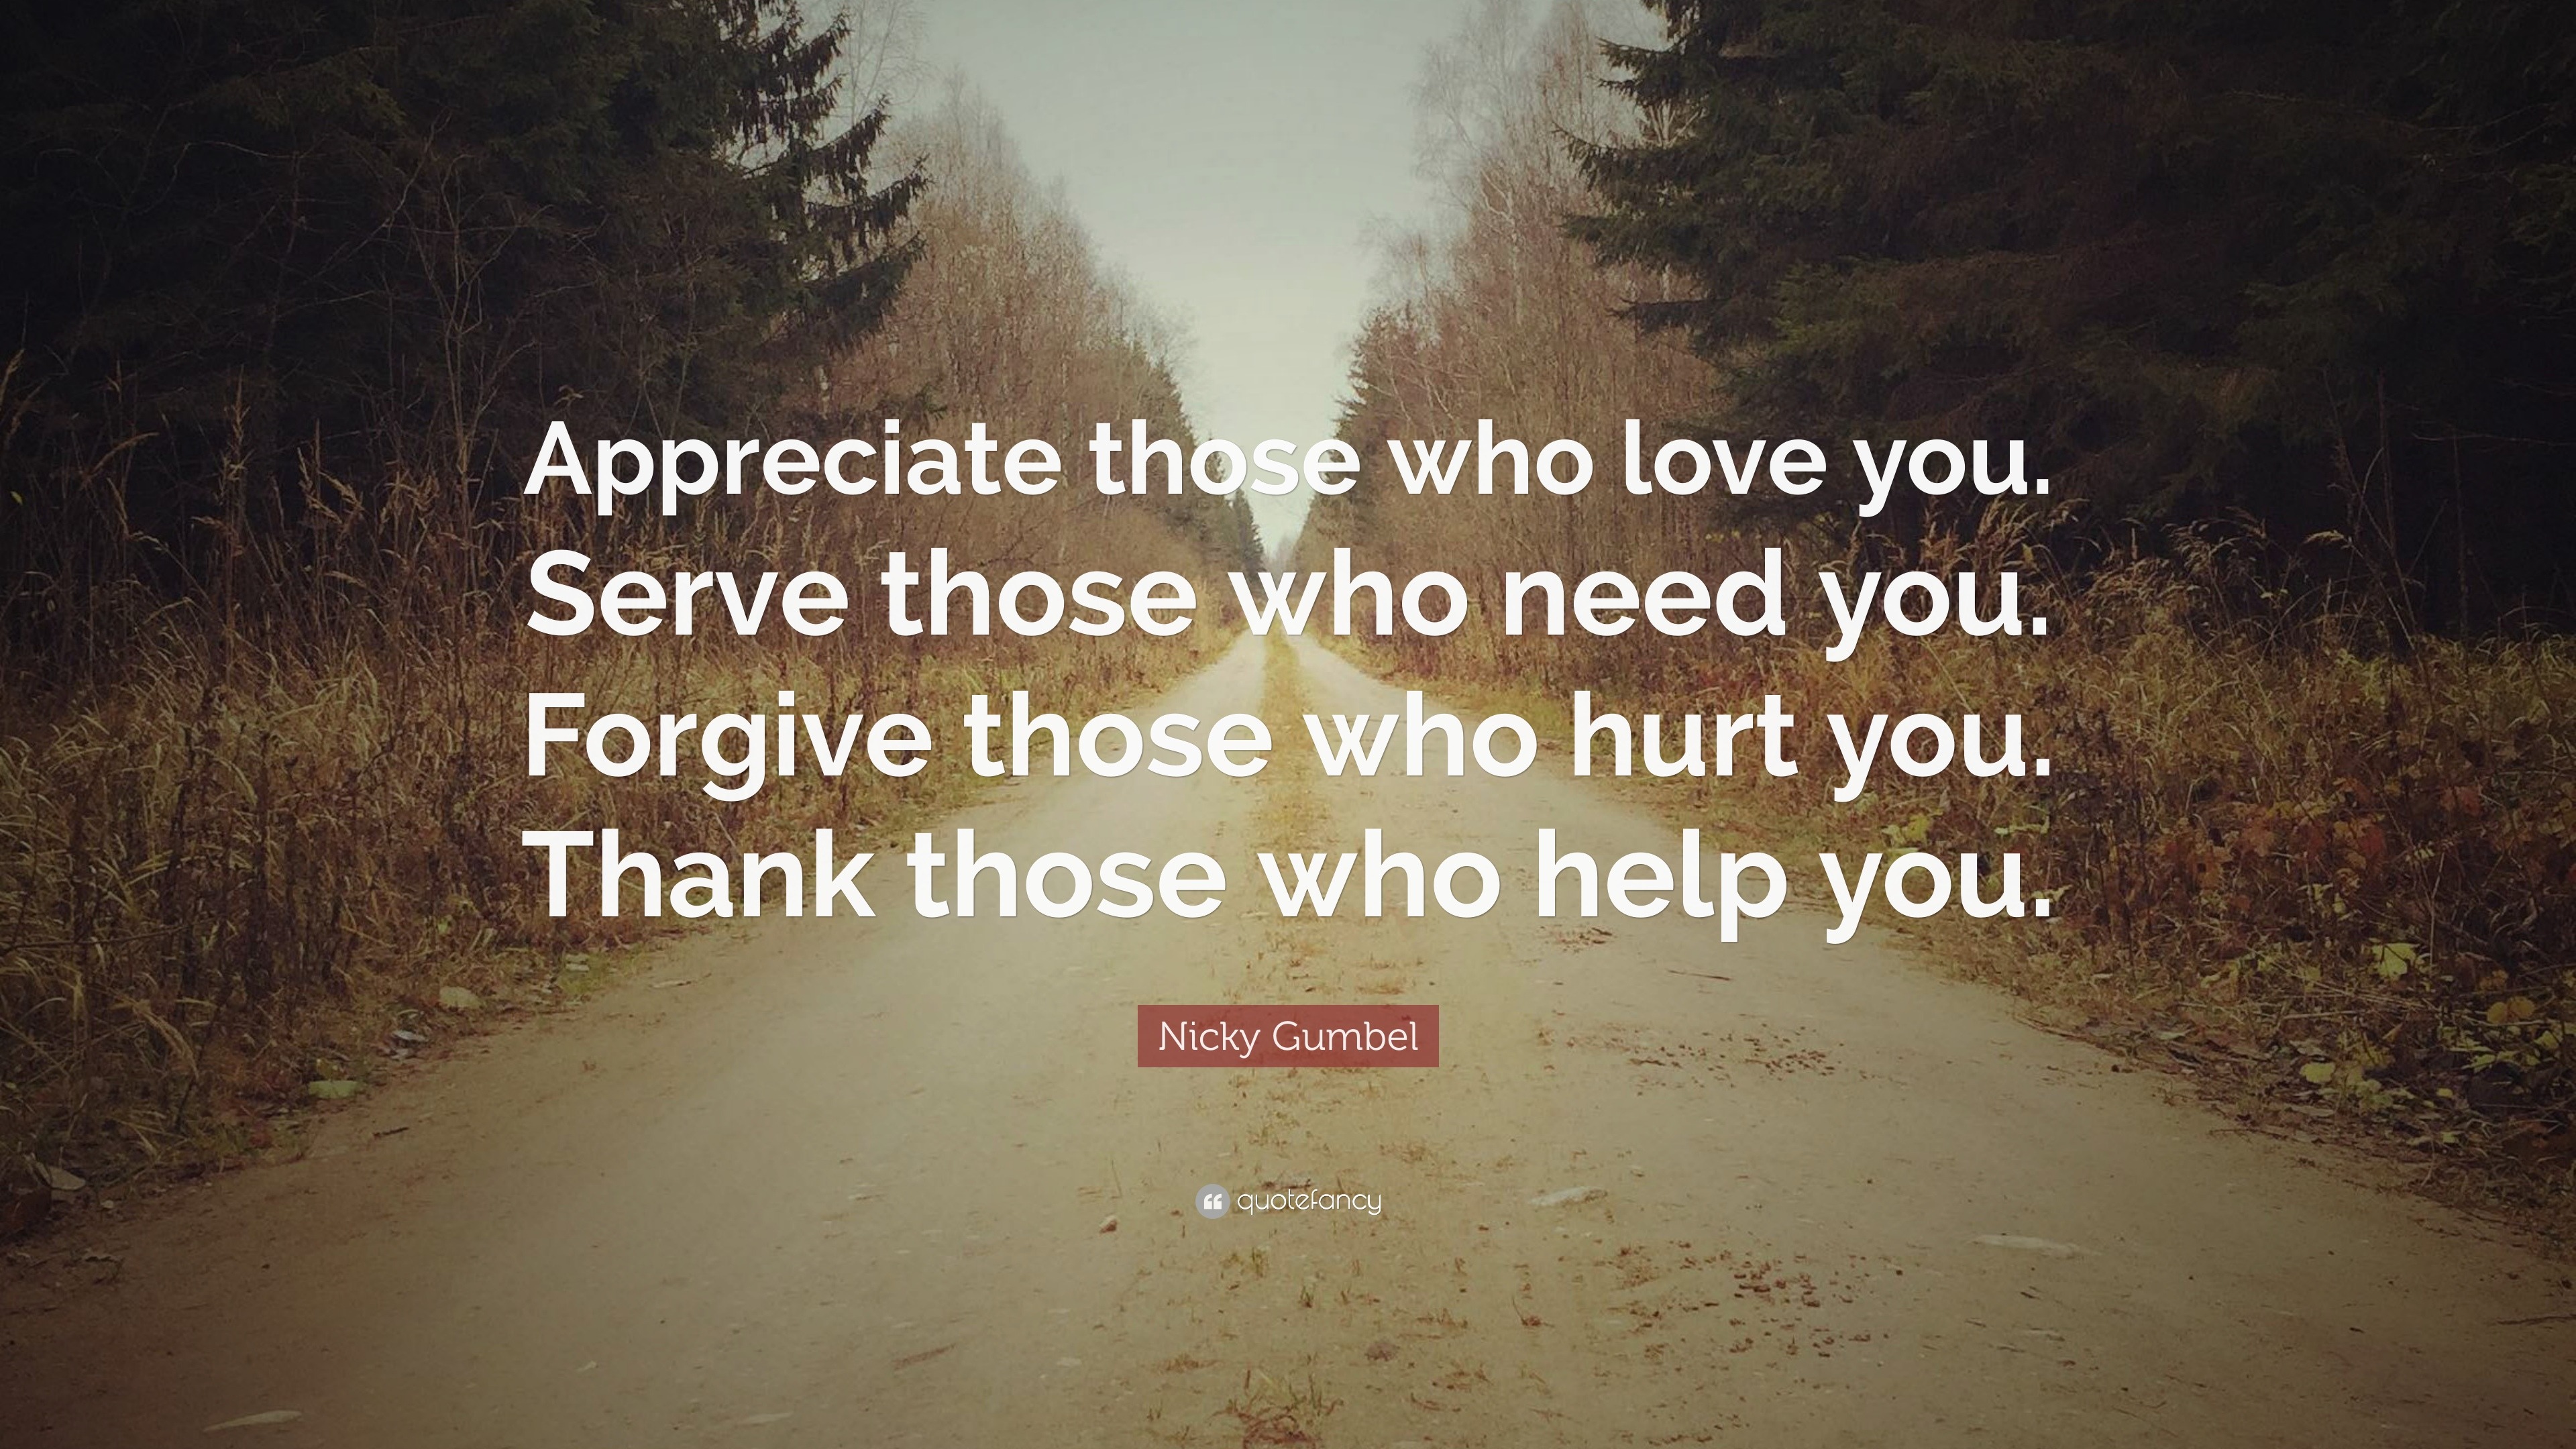 Nicky Gumbel Quote: “Appreciate those who love you. Serve those who ...